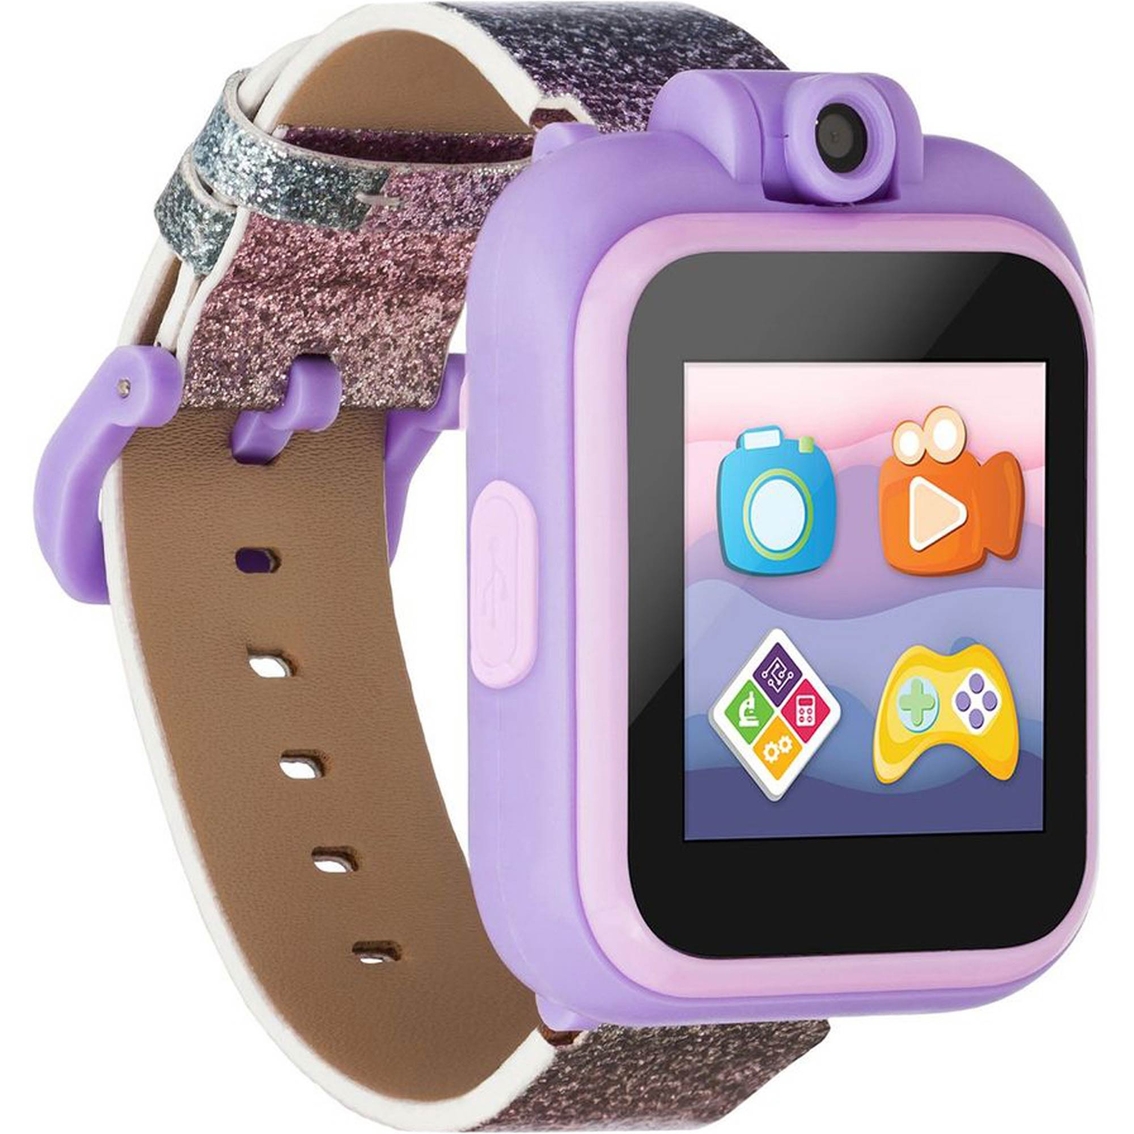 PlayZoom 2 Educational Smartwatch with Headphones: Purple Glitter and Sequin Bow - Image 2 of 7